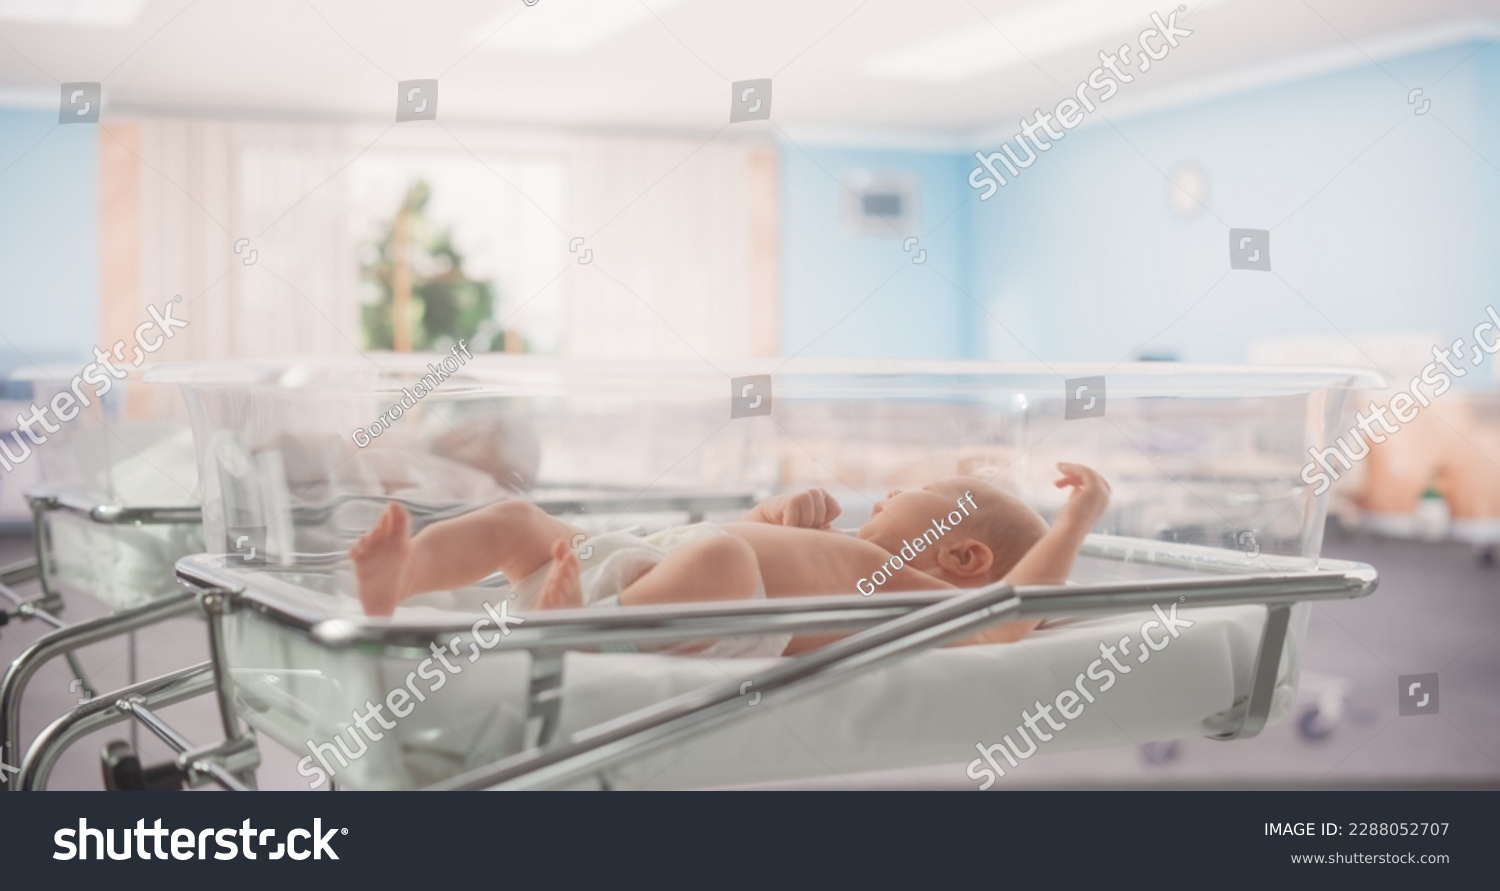 Adorable Caucasian Newborn Child Lying in Hospital Bed in a Nursery Clinic. Little Playful and Healthy Baby. Medical Health Care, Maternity and Parenthood Concept #2288052707